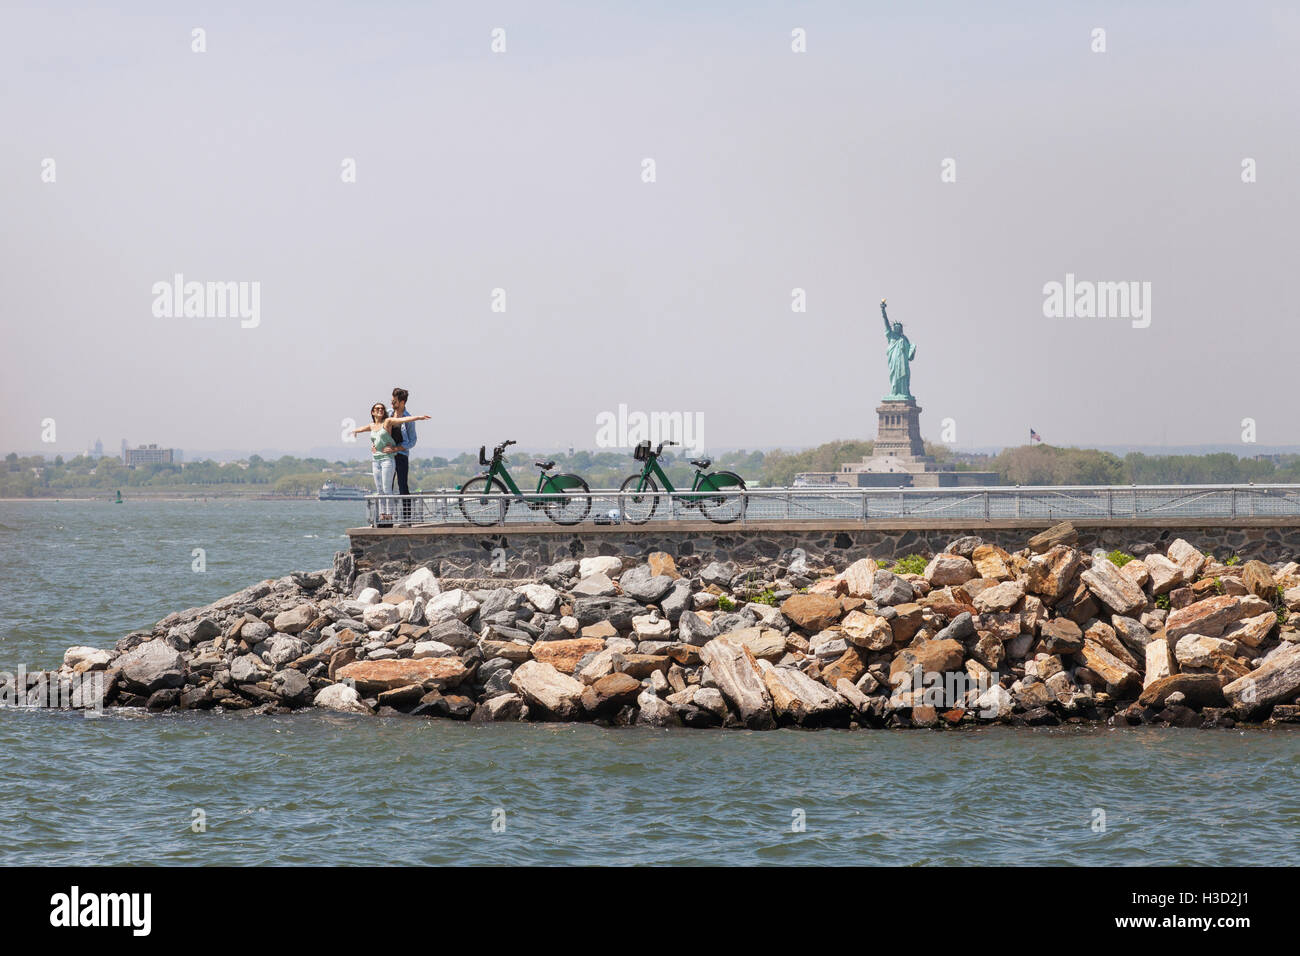 Couple enjoying on observation point with Statue of Liberty in background against clear sky Stock Photo